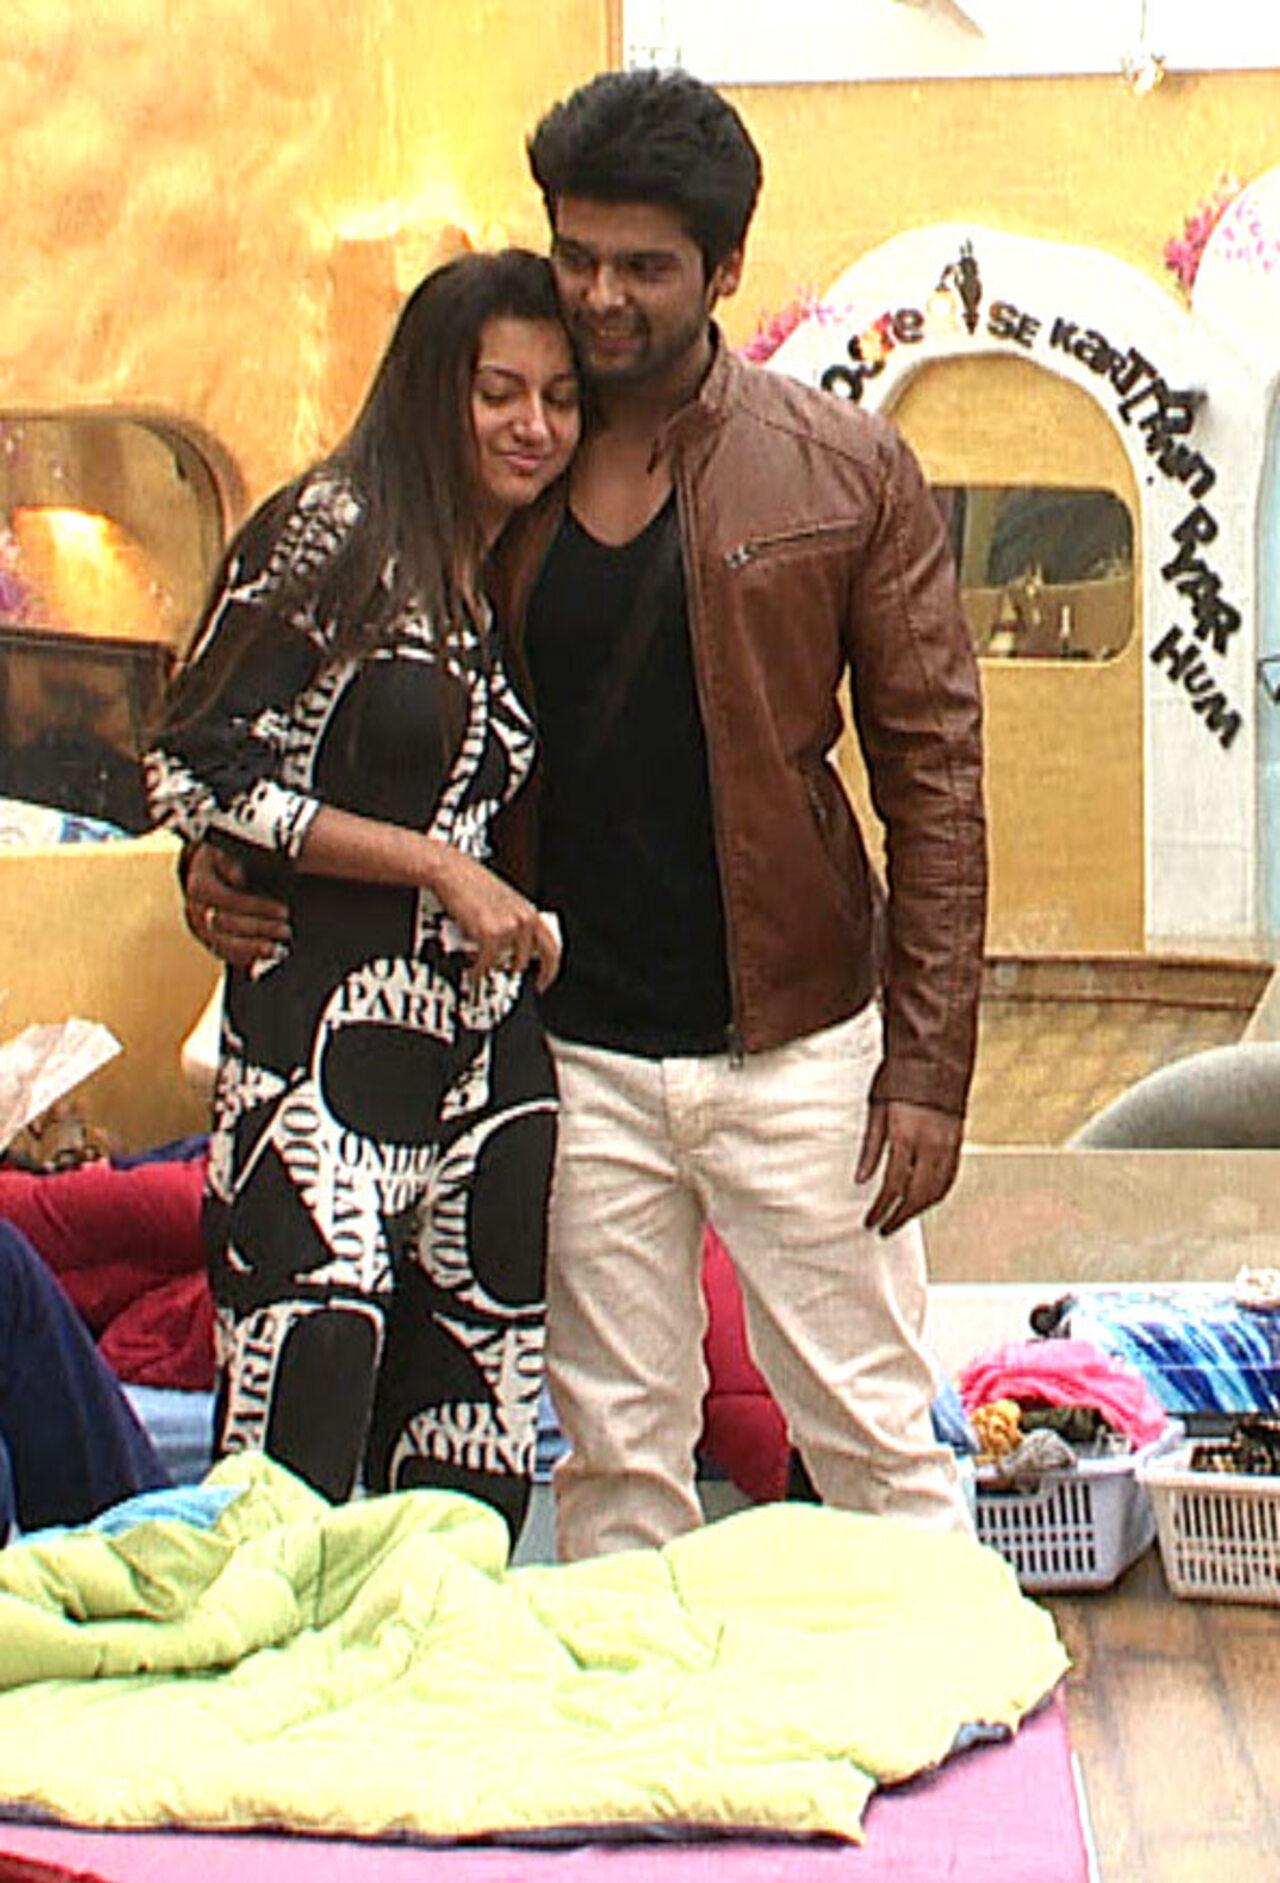 Kushal Tandon and Gauahar Khan fell in love during their time in Bigg Boss house. When VJ Andy made a disrespectful comment about Gauahar, Kushal reacted angrily, leading to his eviction. The actor re-entered the show later